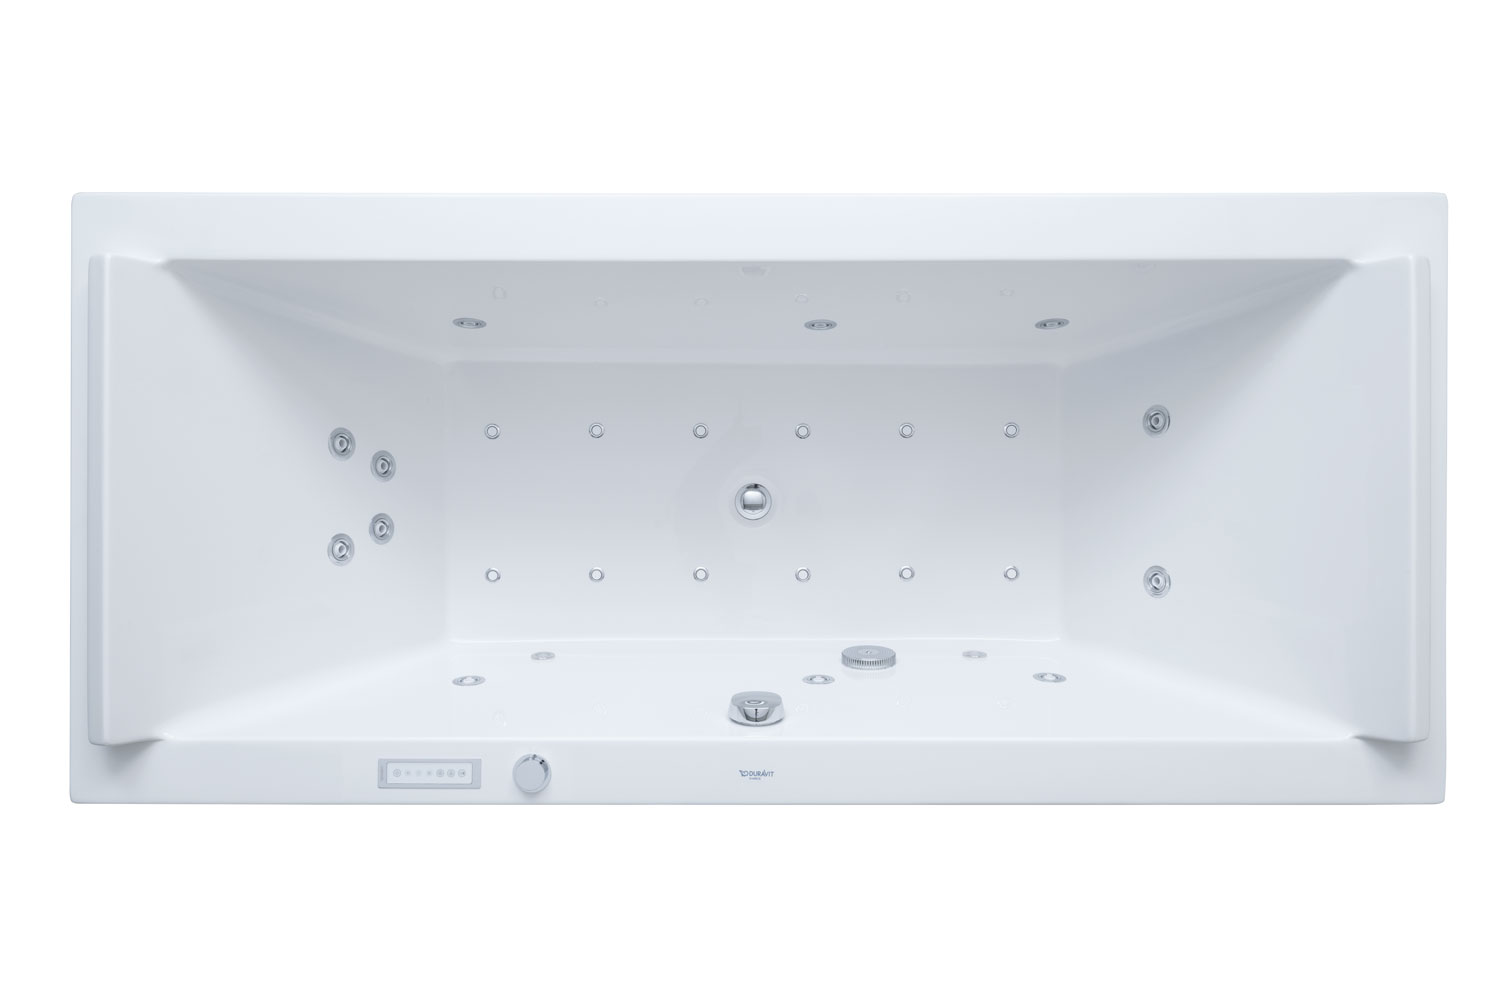 Whirlpool bathtub with combi system E
